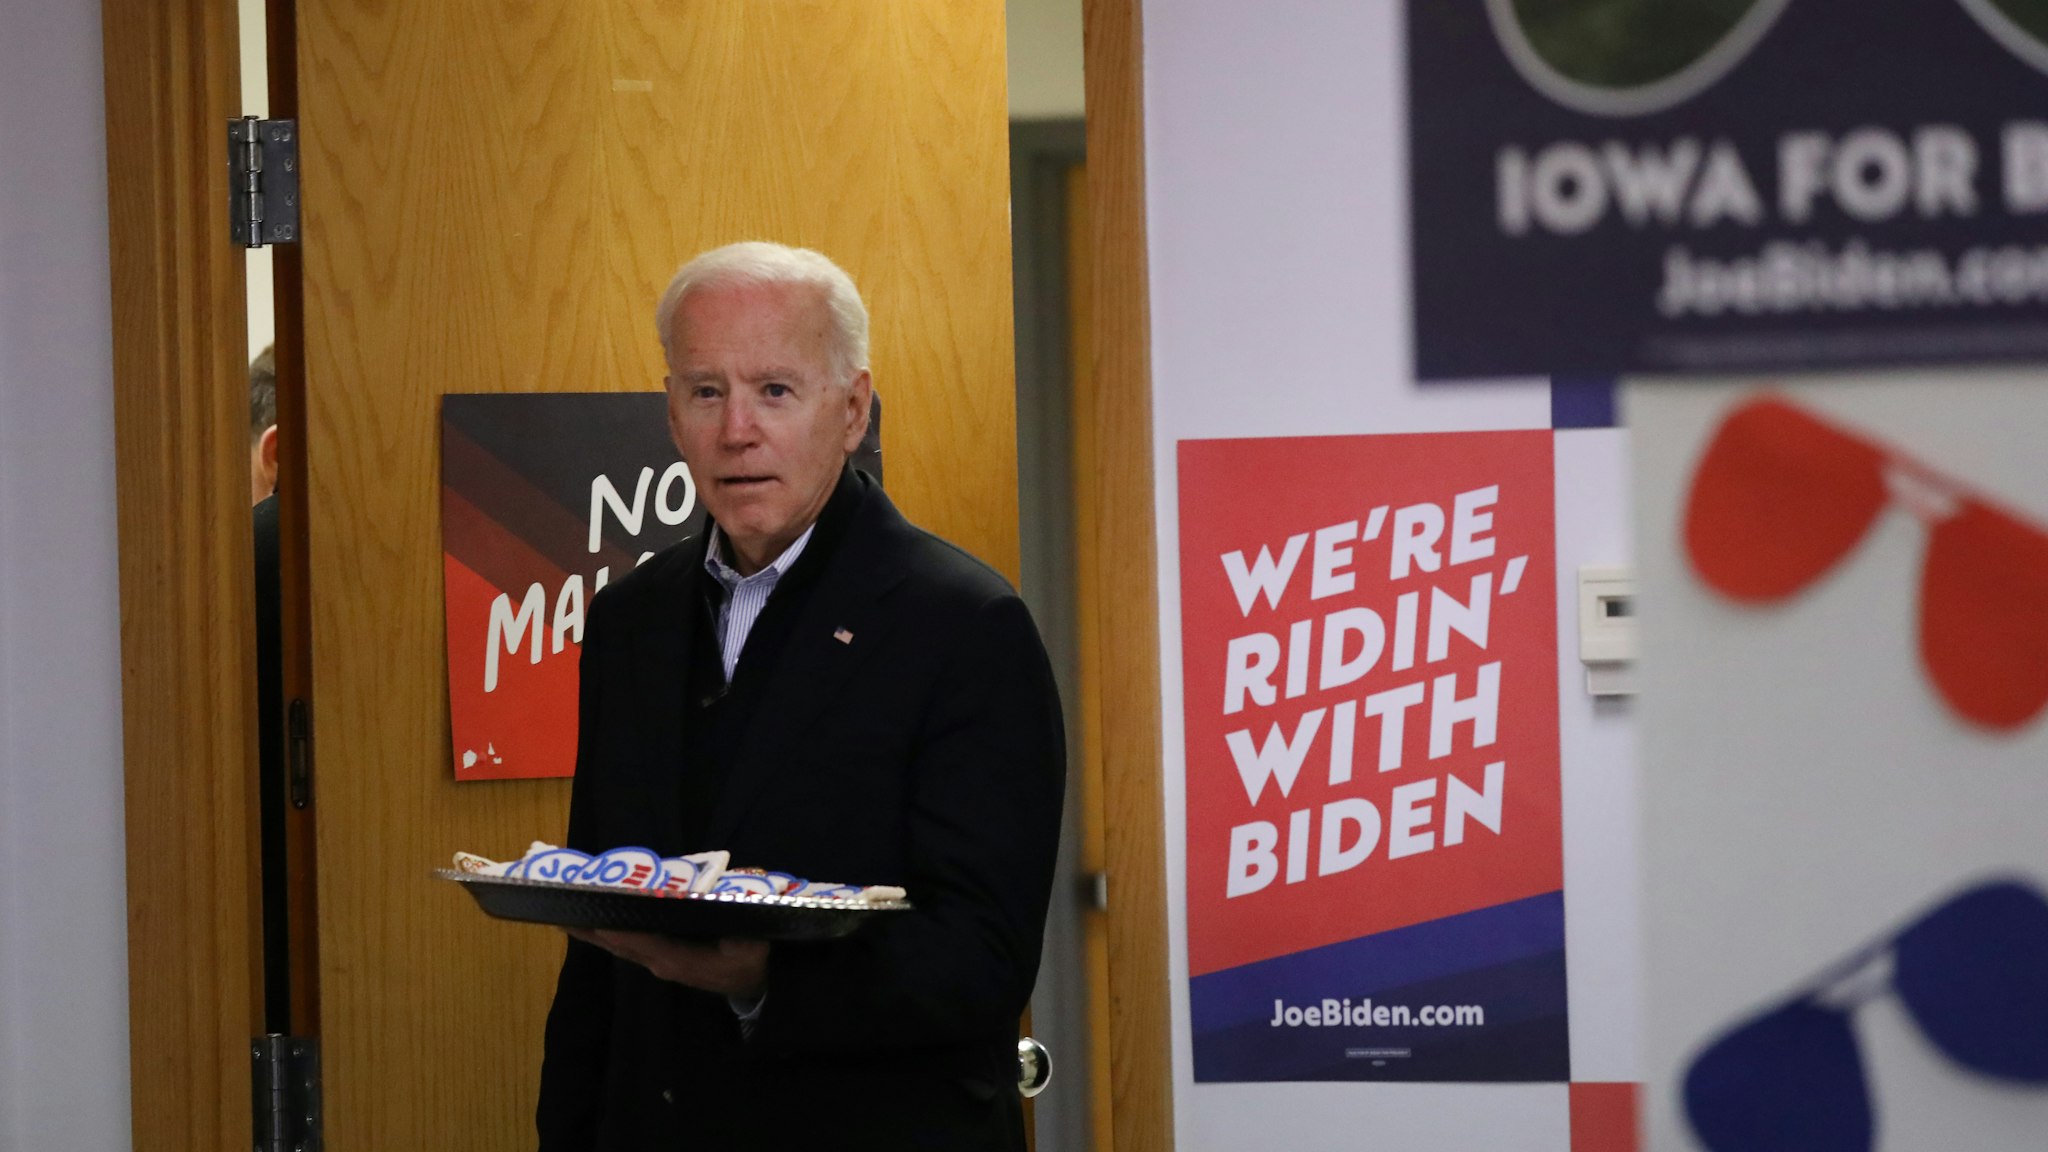 DES MOINES, IOWA - JANUARY 13: Democratic presidential candidate, former Vice President Joe Biden greets volunteers at state campaign headquarters on January 13, 2020 in Des Moines, Iowa. A new poll by Monmouth University released today shows Biden atop the Democratic field in Iowa with 24 percent of the vote, six points in front of Sen. Bernie Sanders (I-VT) ahead of next month’s caucuses. (Photo by Spencer Platt/Getty Images)